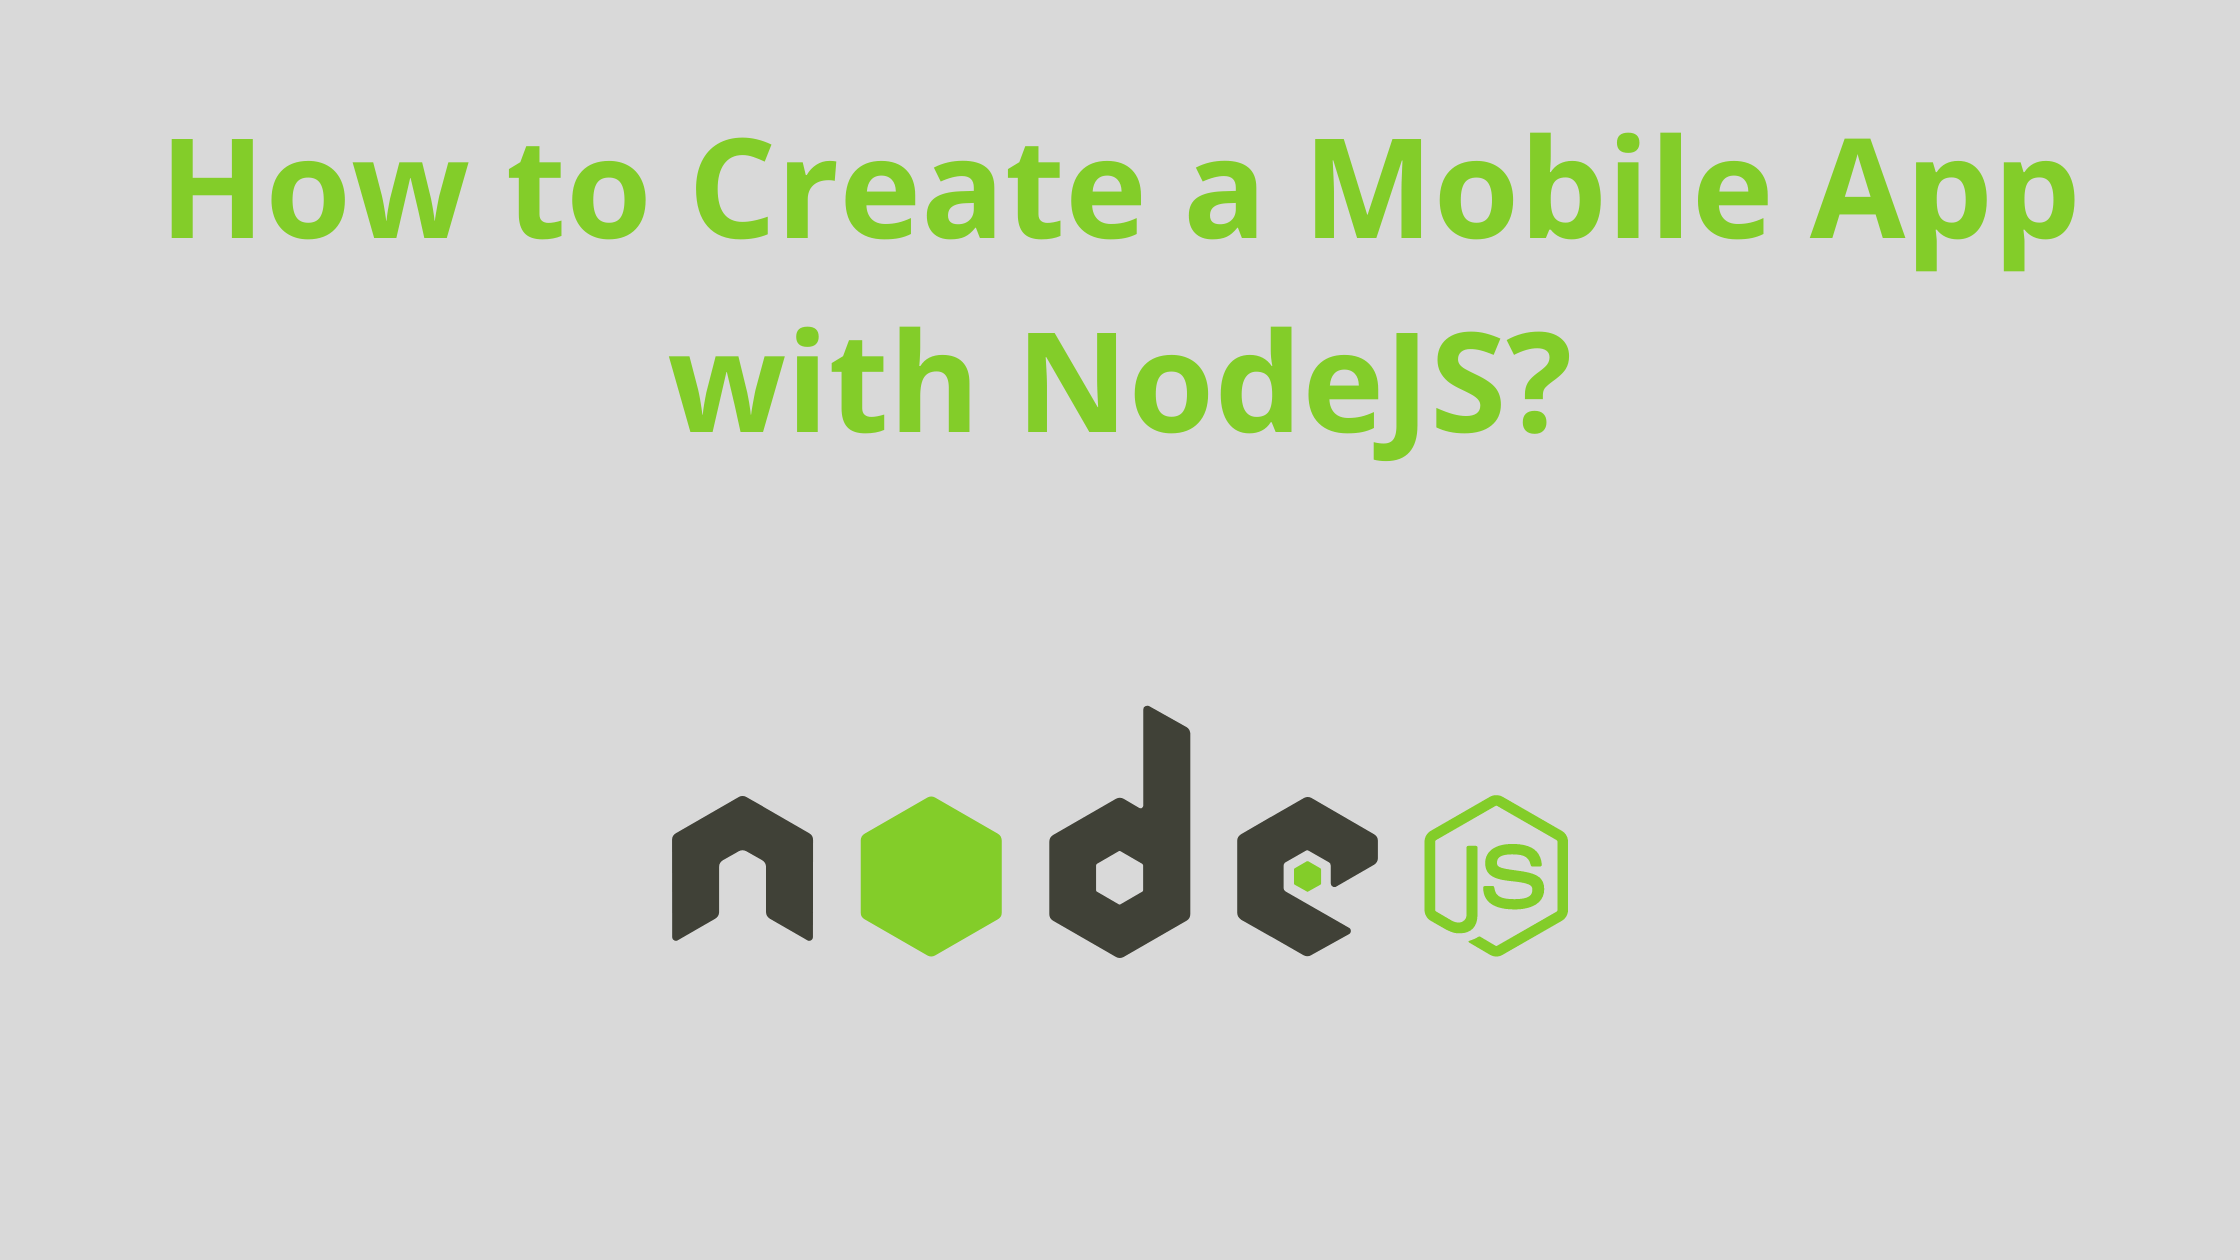 How to Create a Mobile App with NodeJS